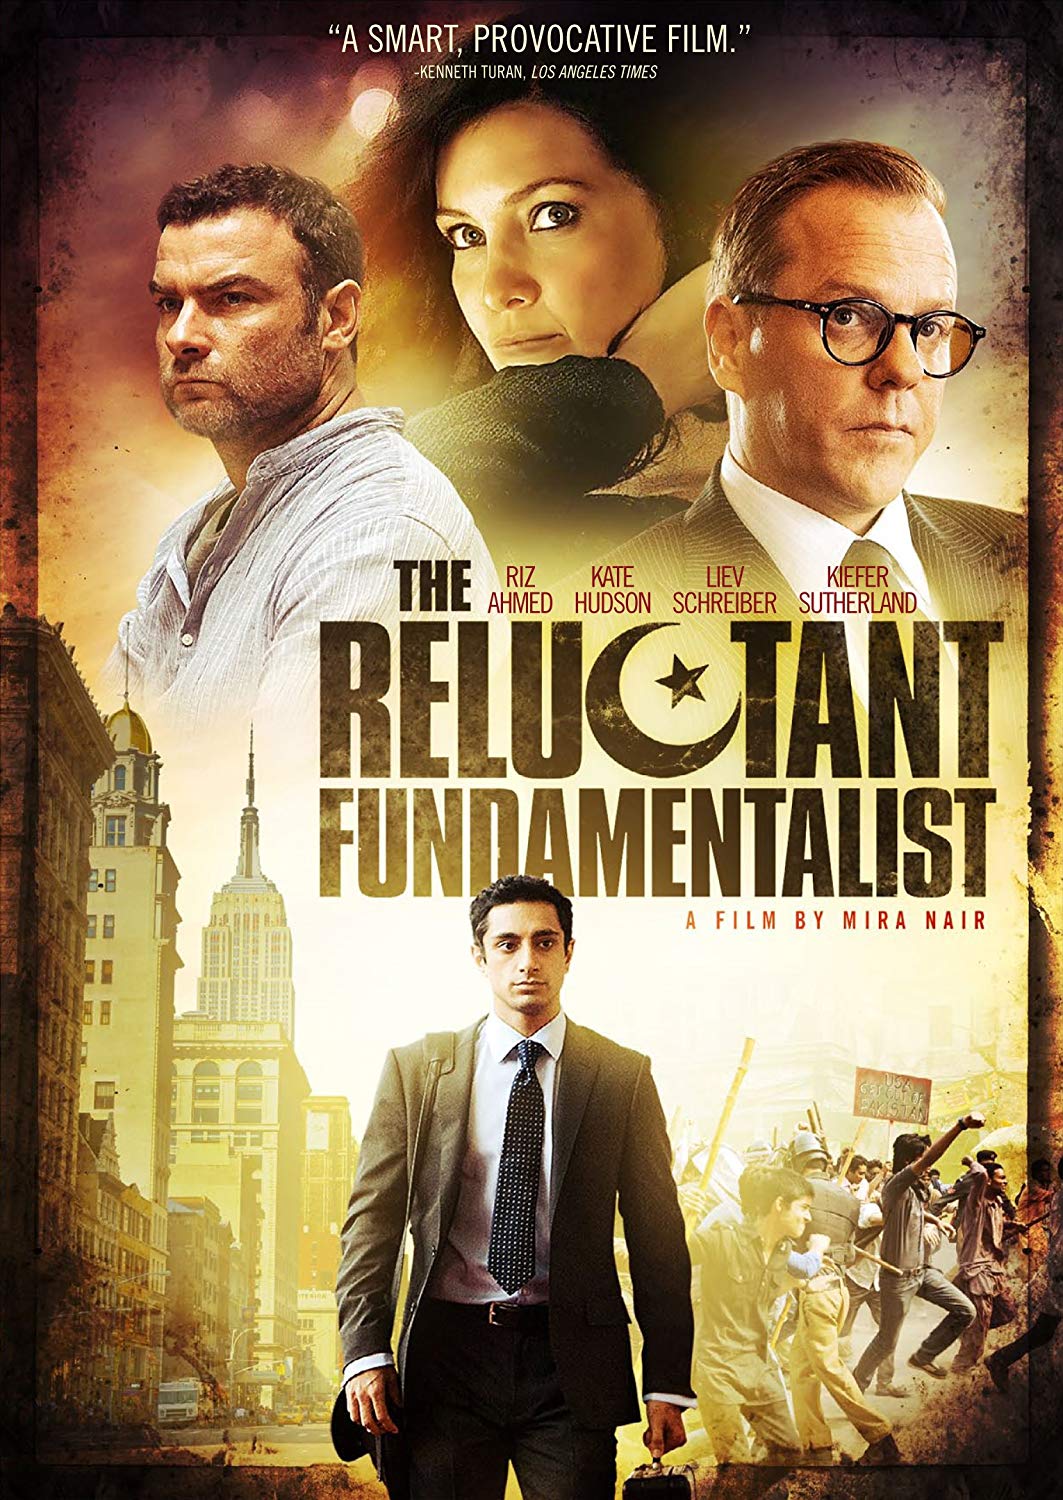 The Reluctant Fundamentalist DVD